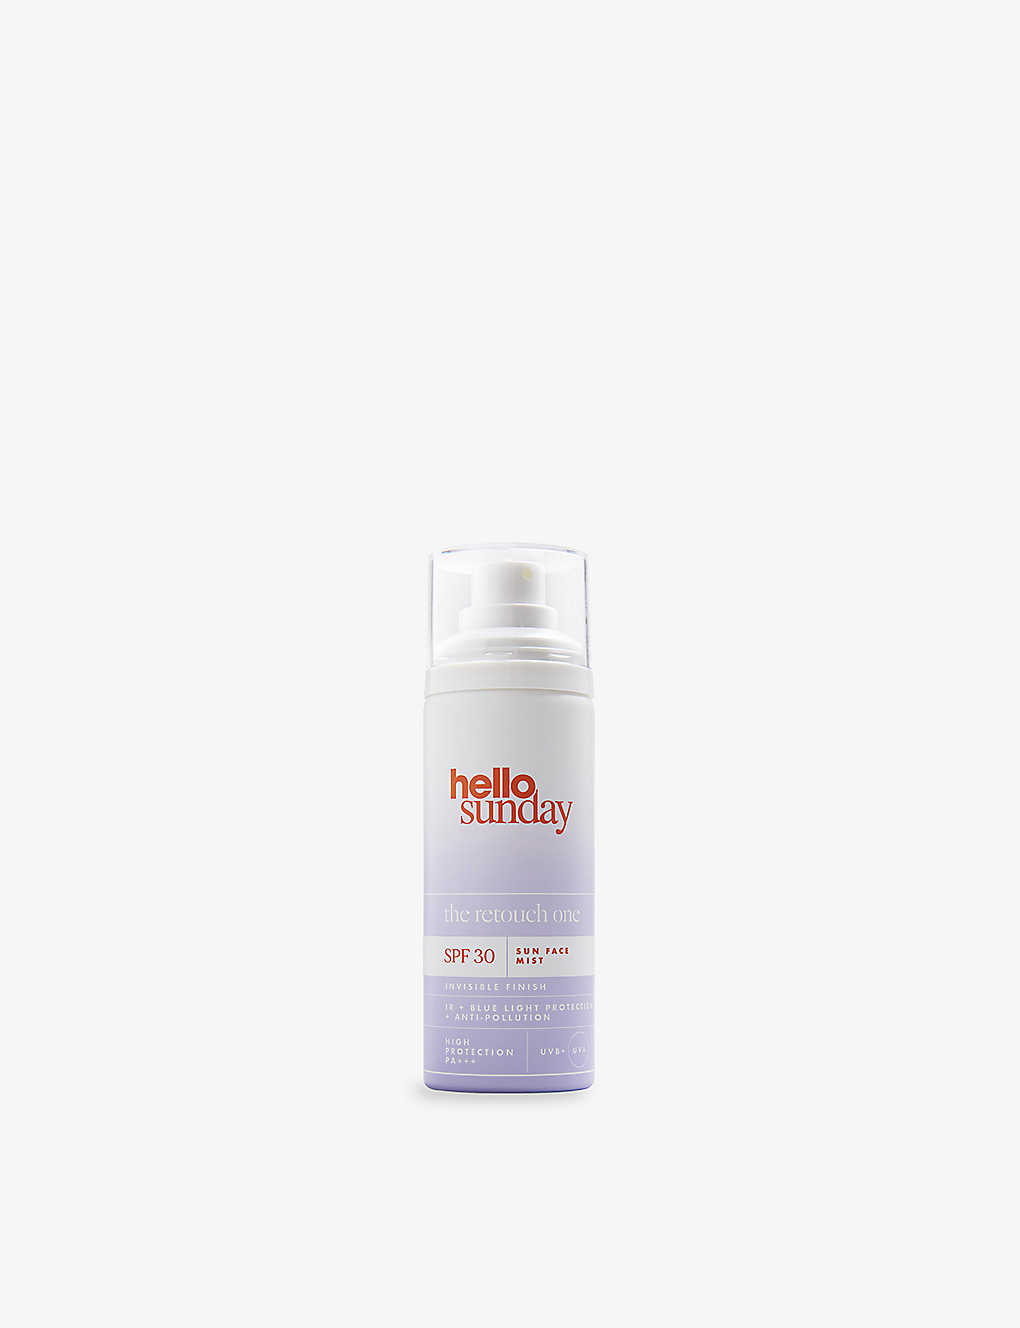 Hello Sunday The Retouch One Face Mist Spf 30